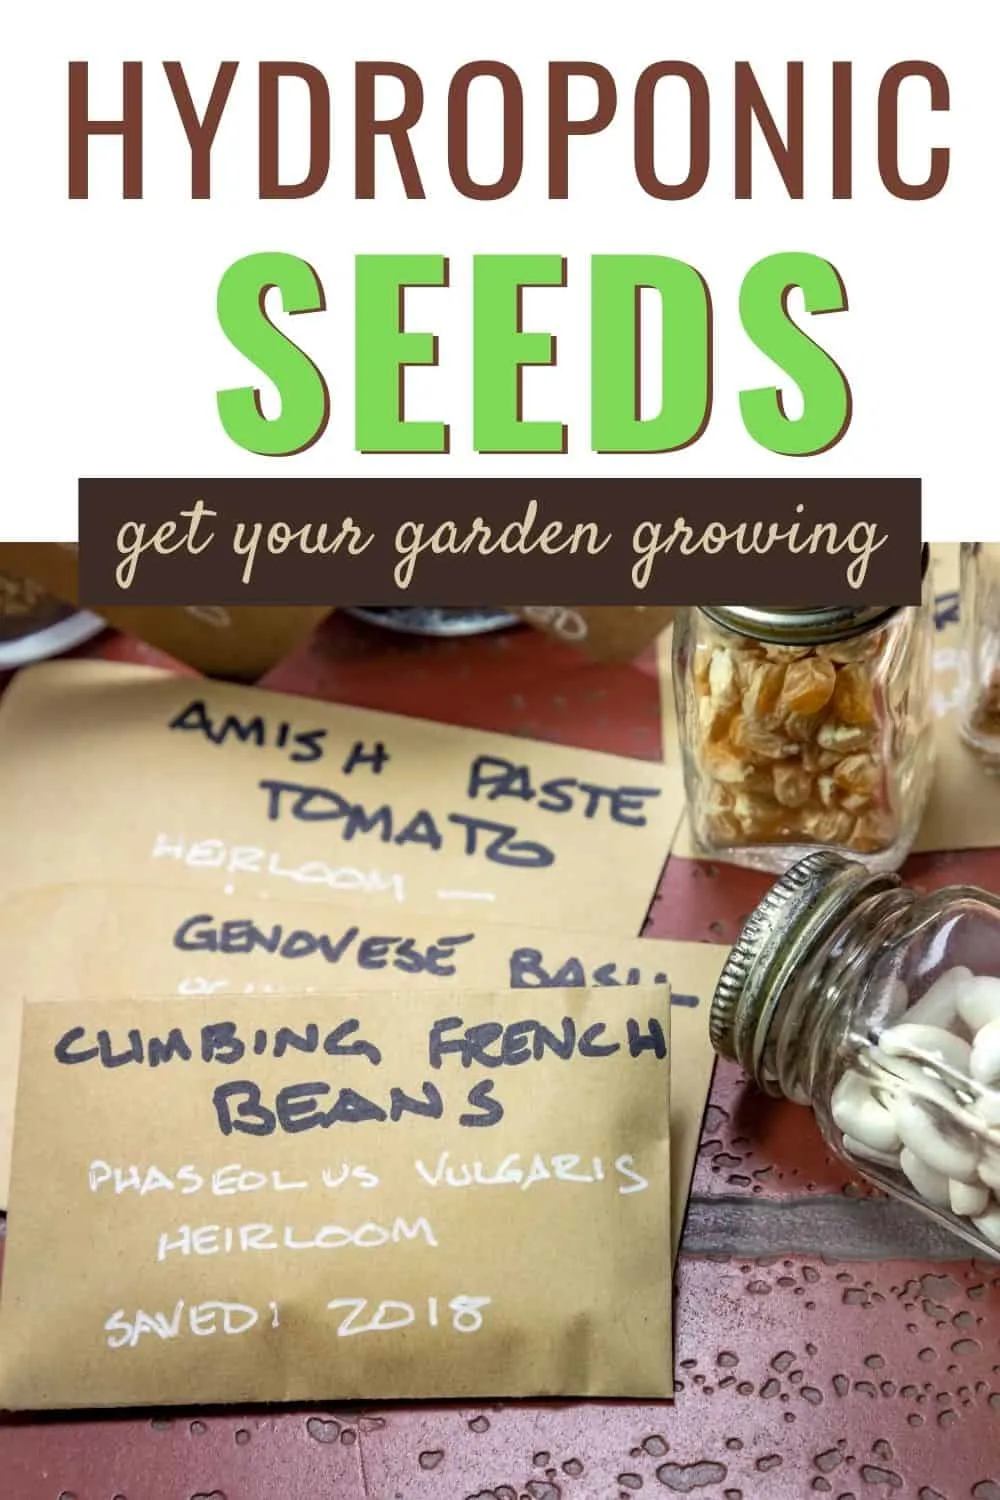 Hydroponic seeds to get your garden going